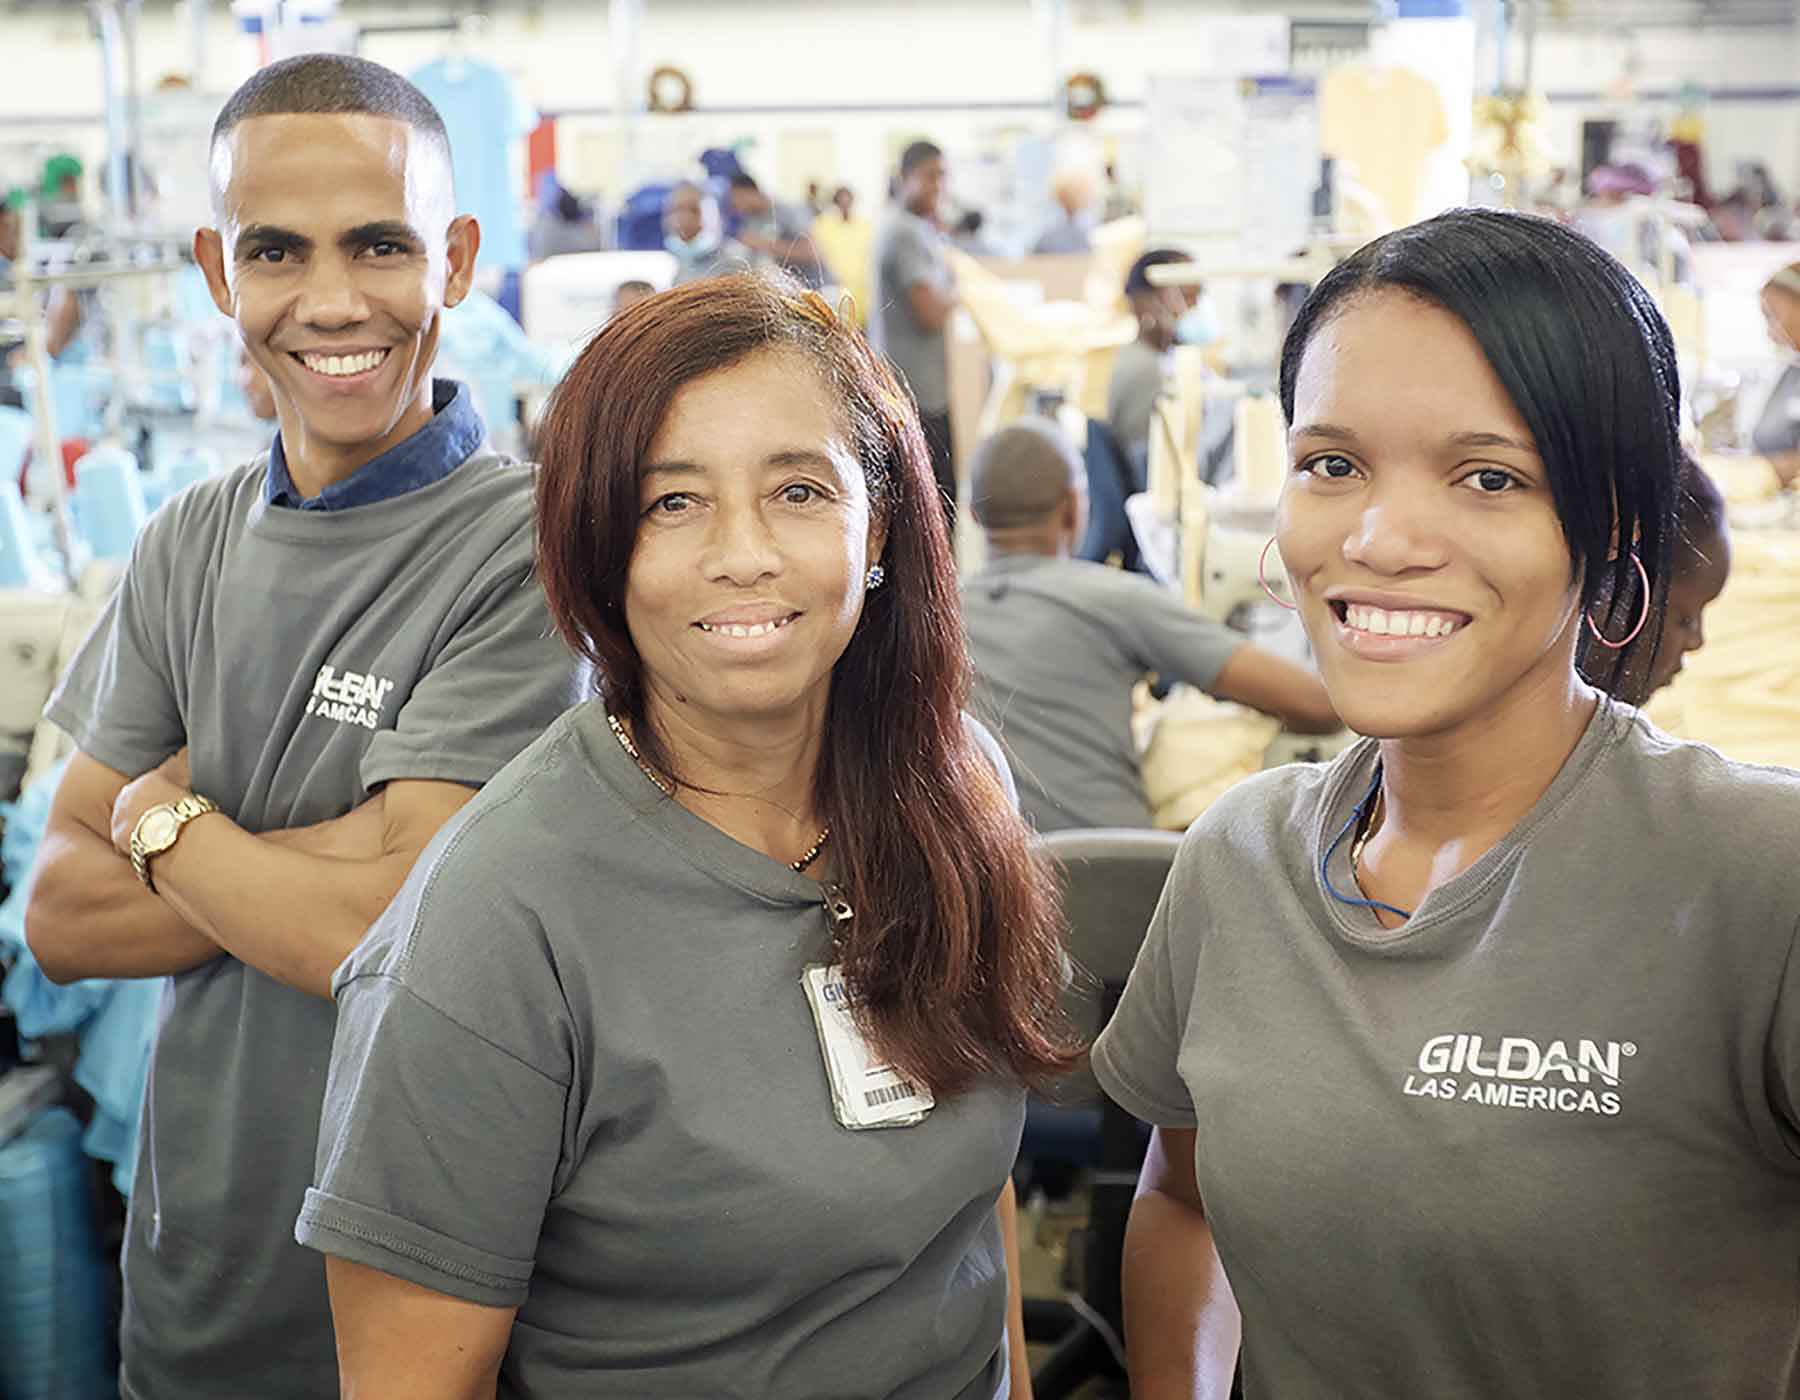 Three Gildan sewing employees from Las Americas, Dominican Republic, are smiling at the camera.